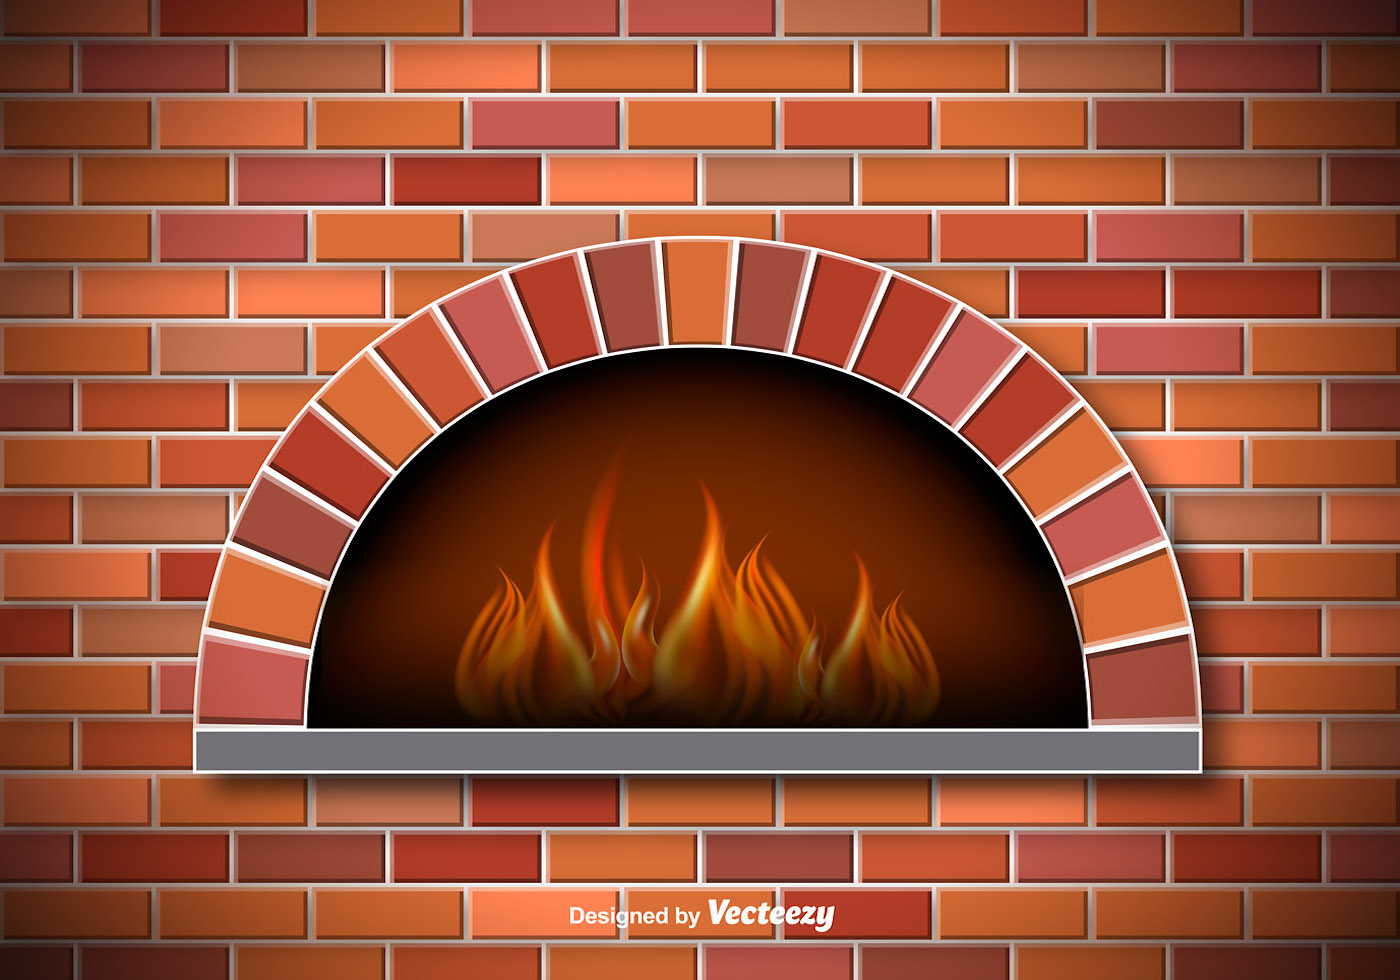 Fireplace clipart brick oven. Free cliparts download clip